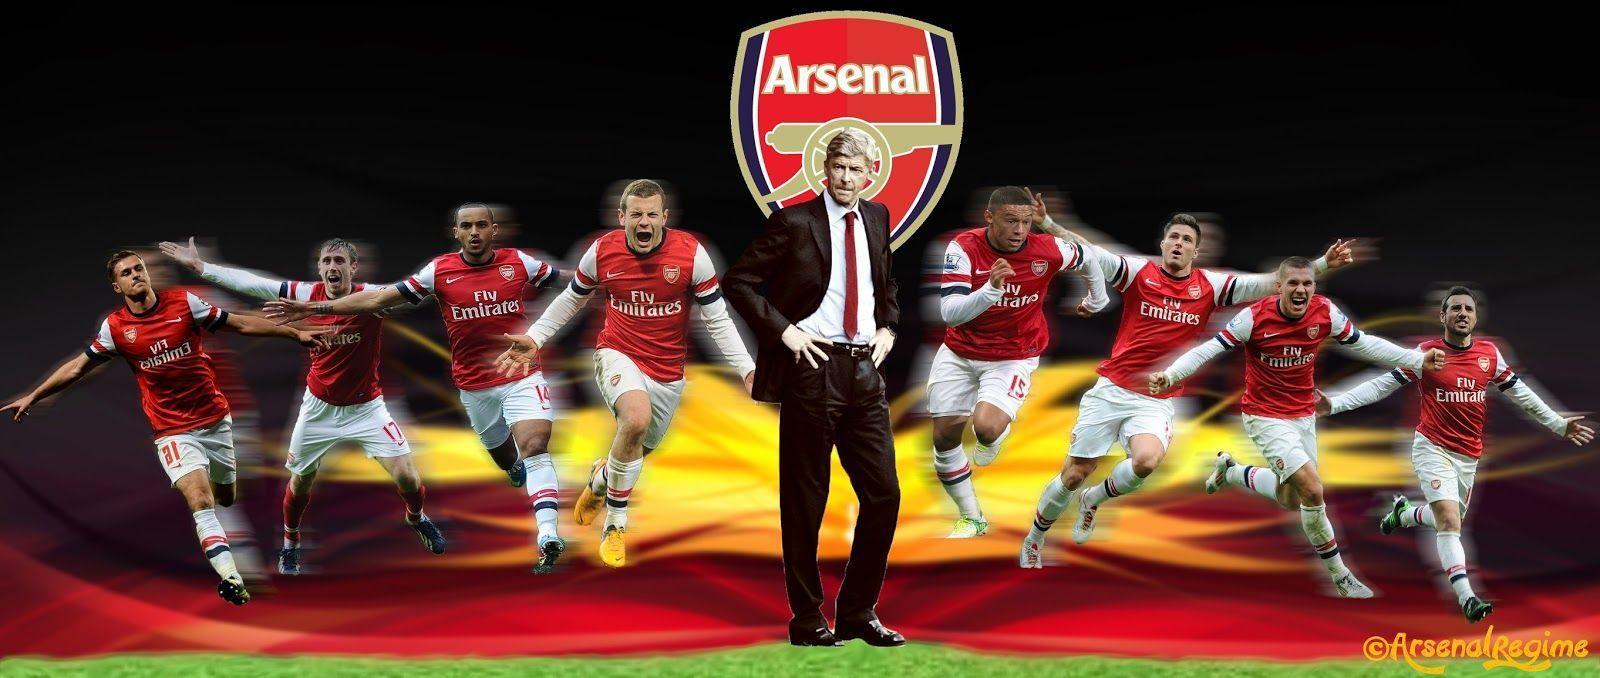 Arsene Wenger Wallpaper HD Arsenal Coach and Manager. Wallpaper